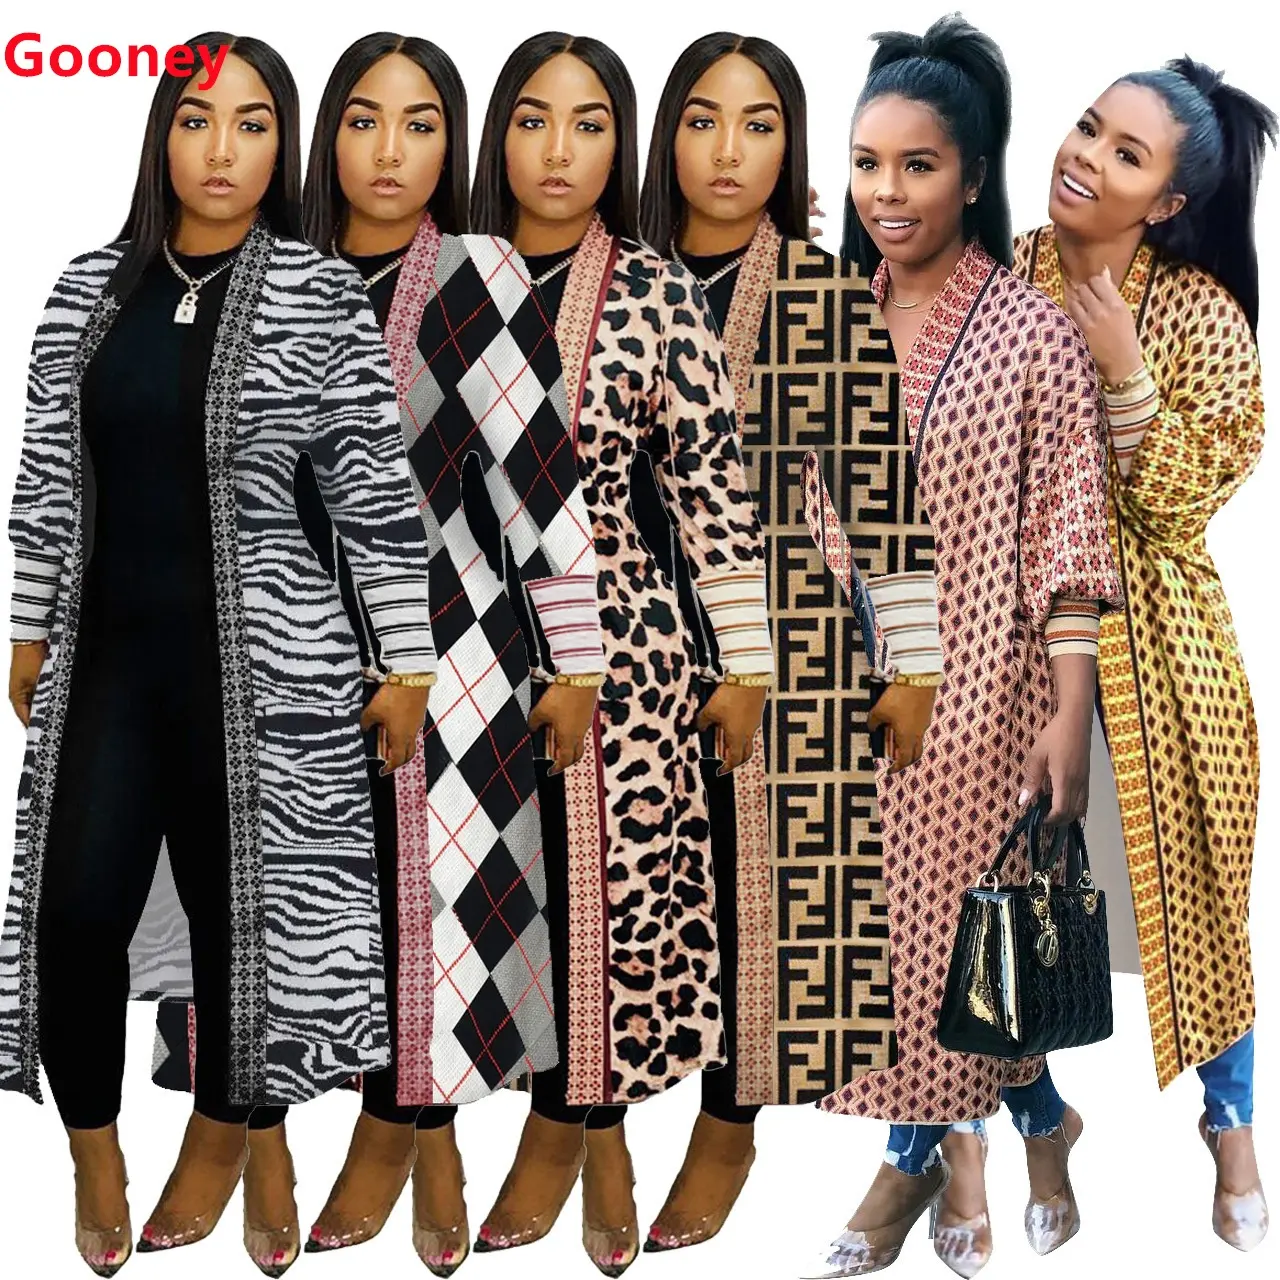 2021 hot sales fashionable women's cardigan coat pattern printed full sleeve loose casual womans long jackets for women coats